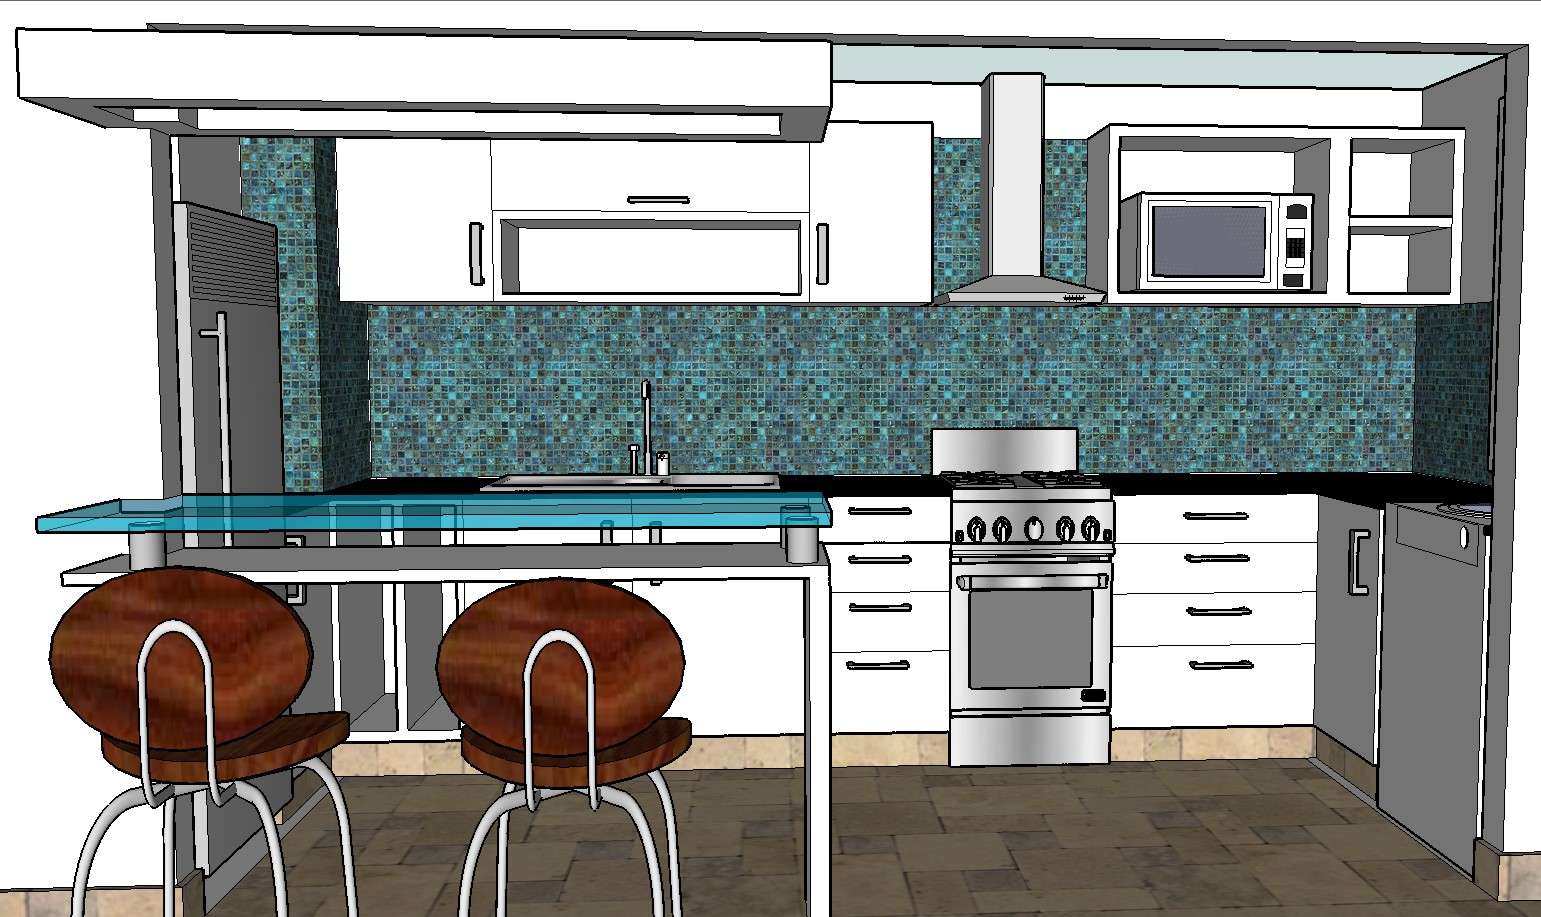  Kitchen  3d drawing furniture and interior cad drawing 